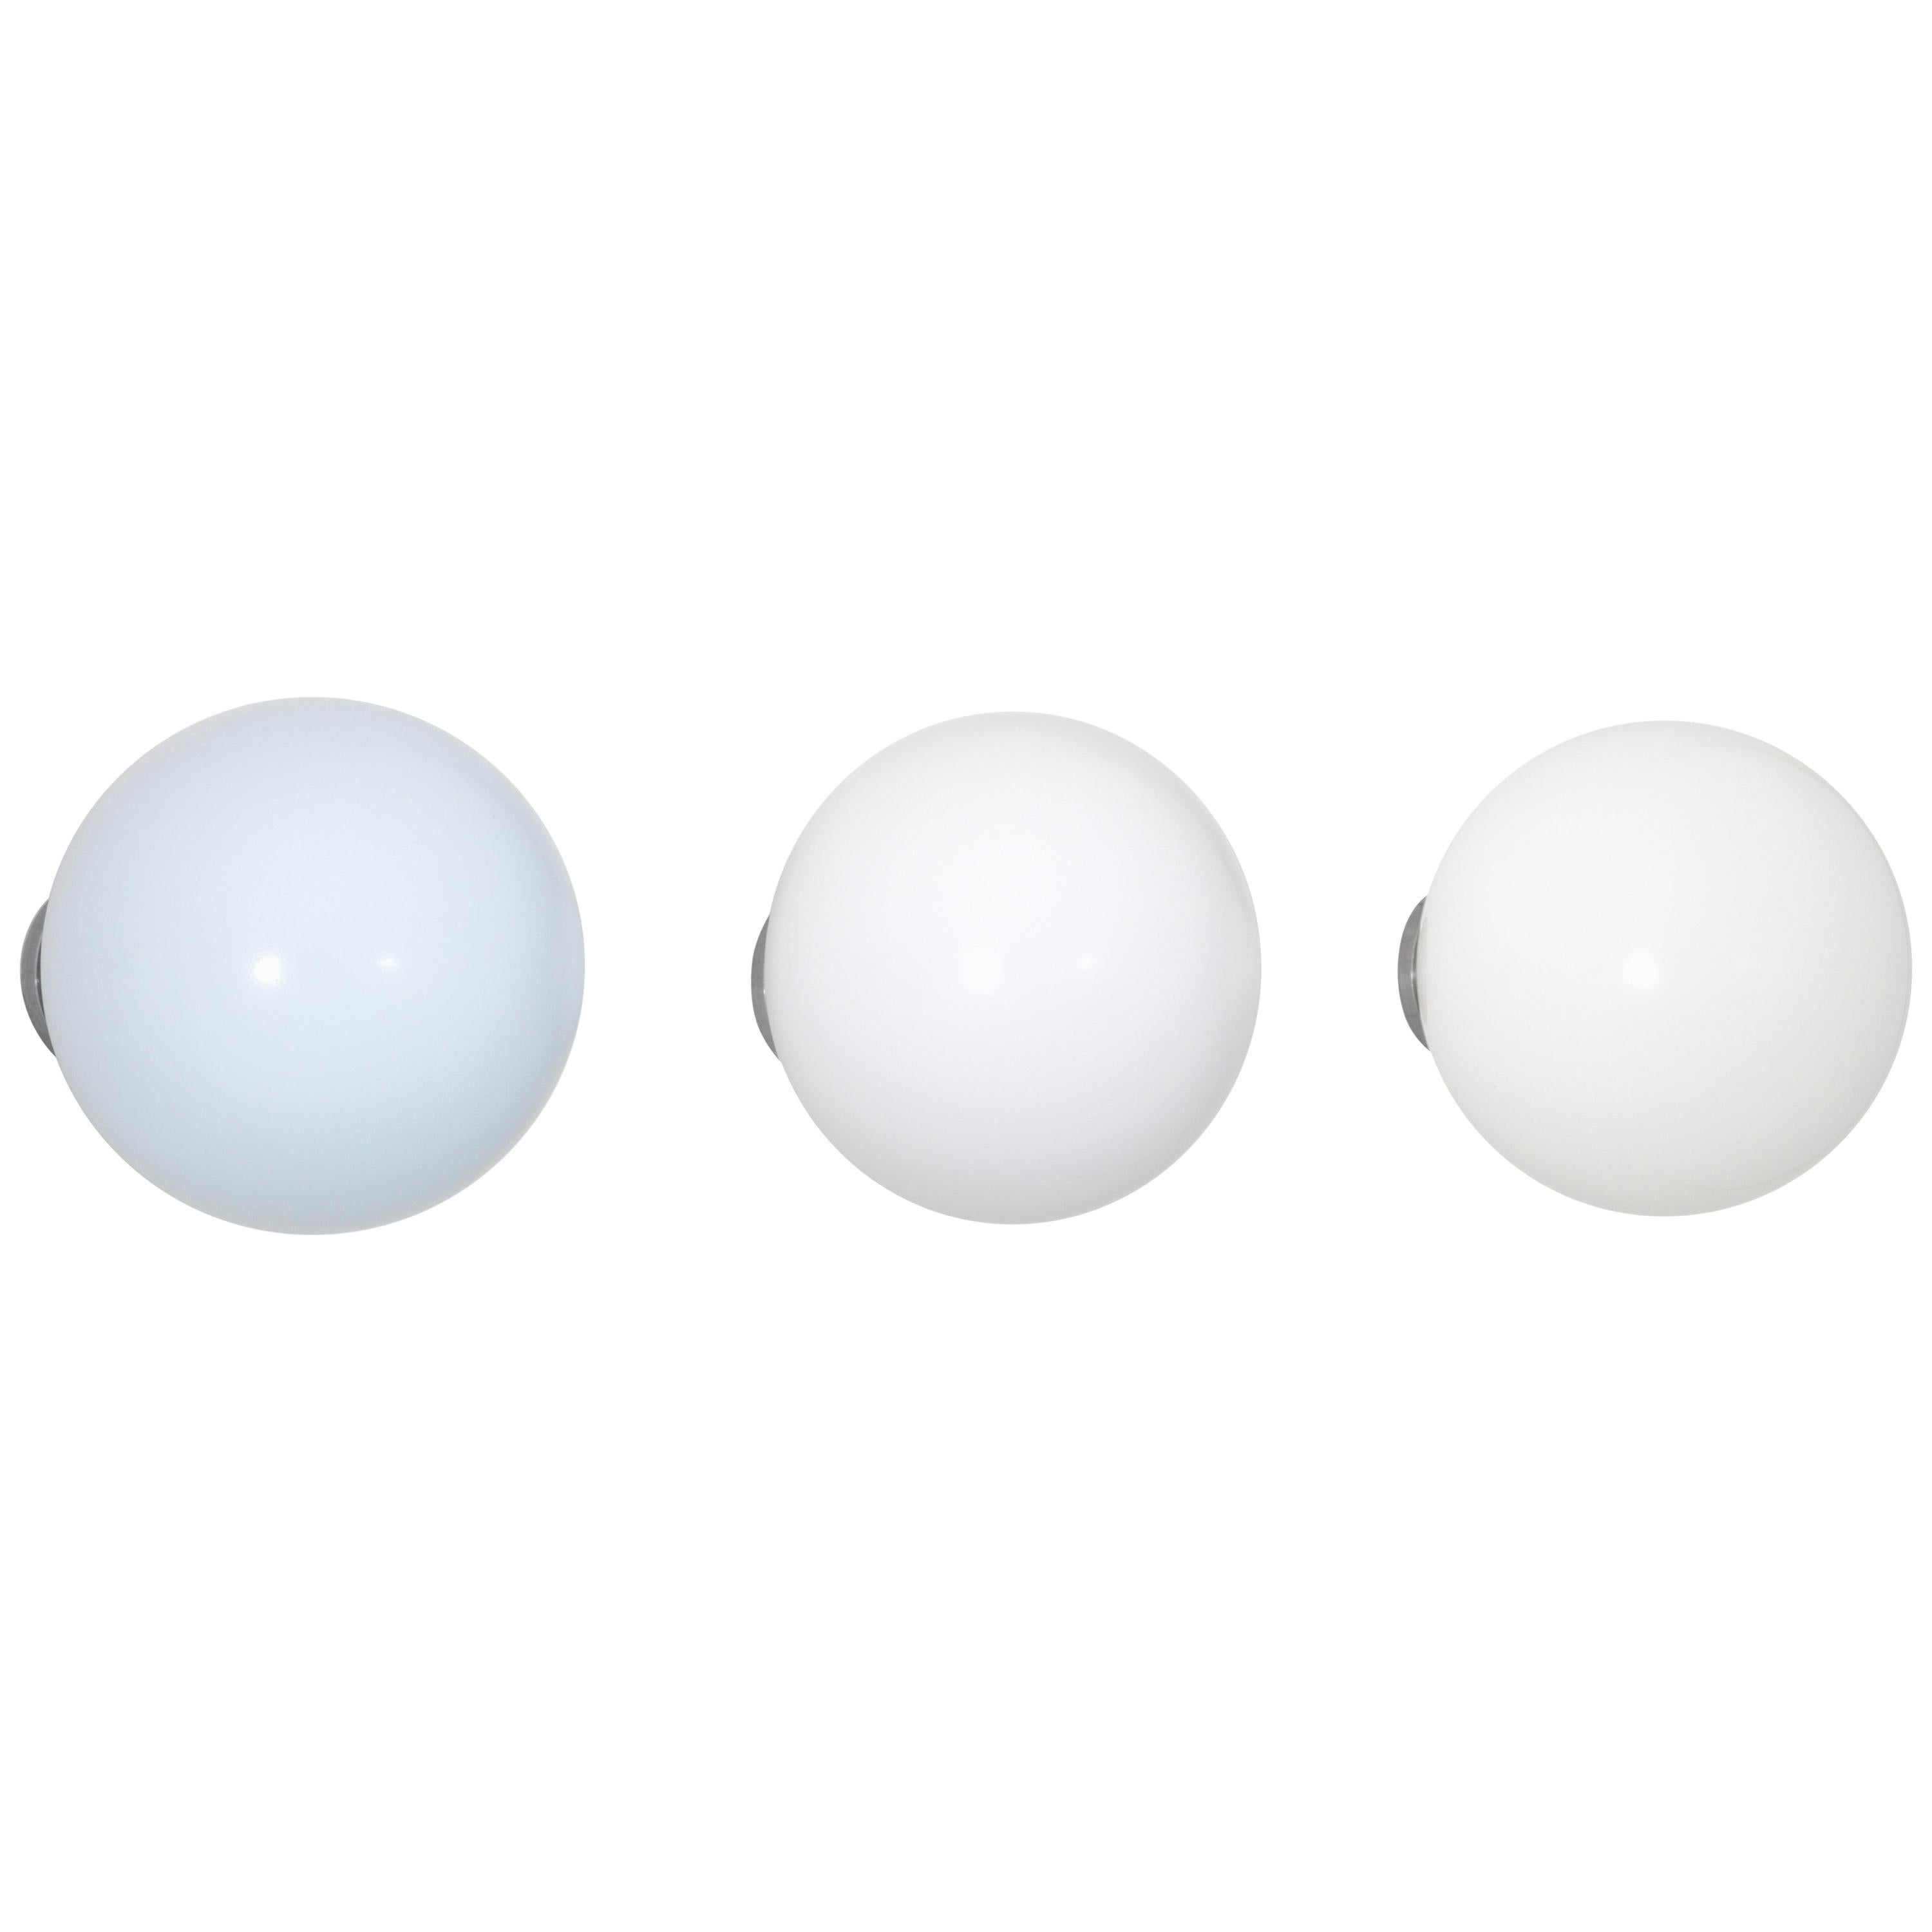 Vitra Coat Dots Set of 3 in Shades of White by Hella Jongerius For Sale